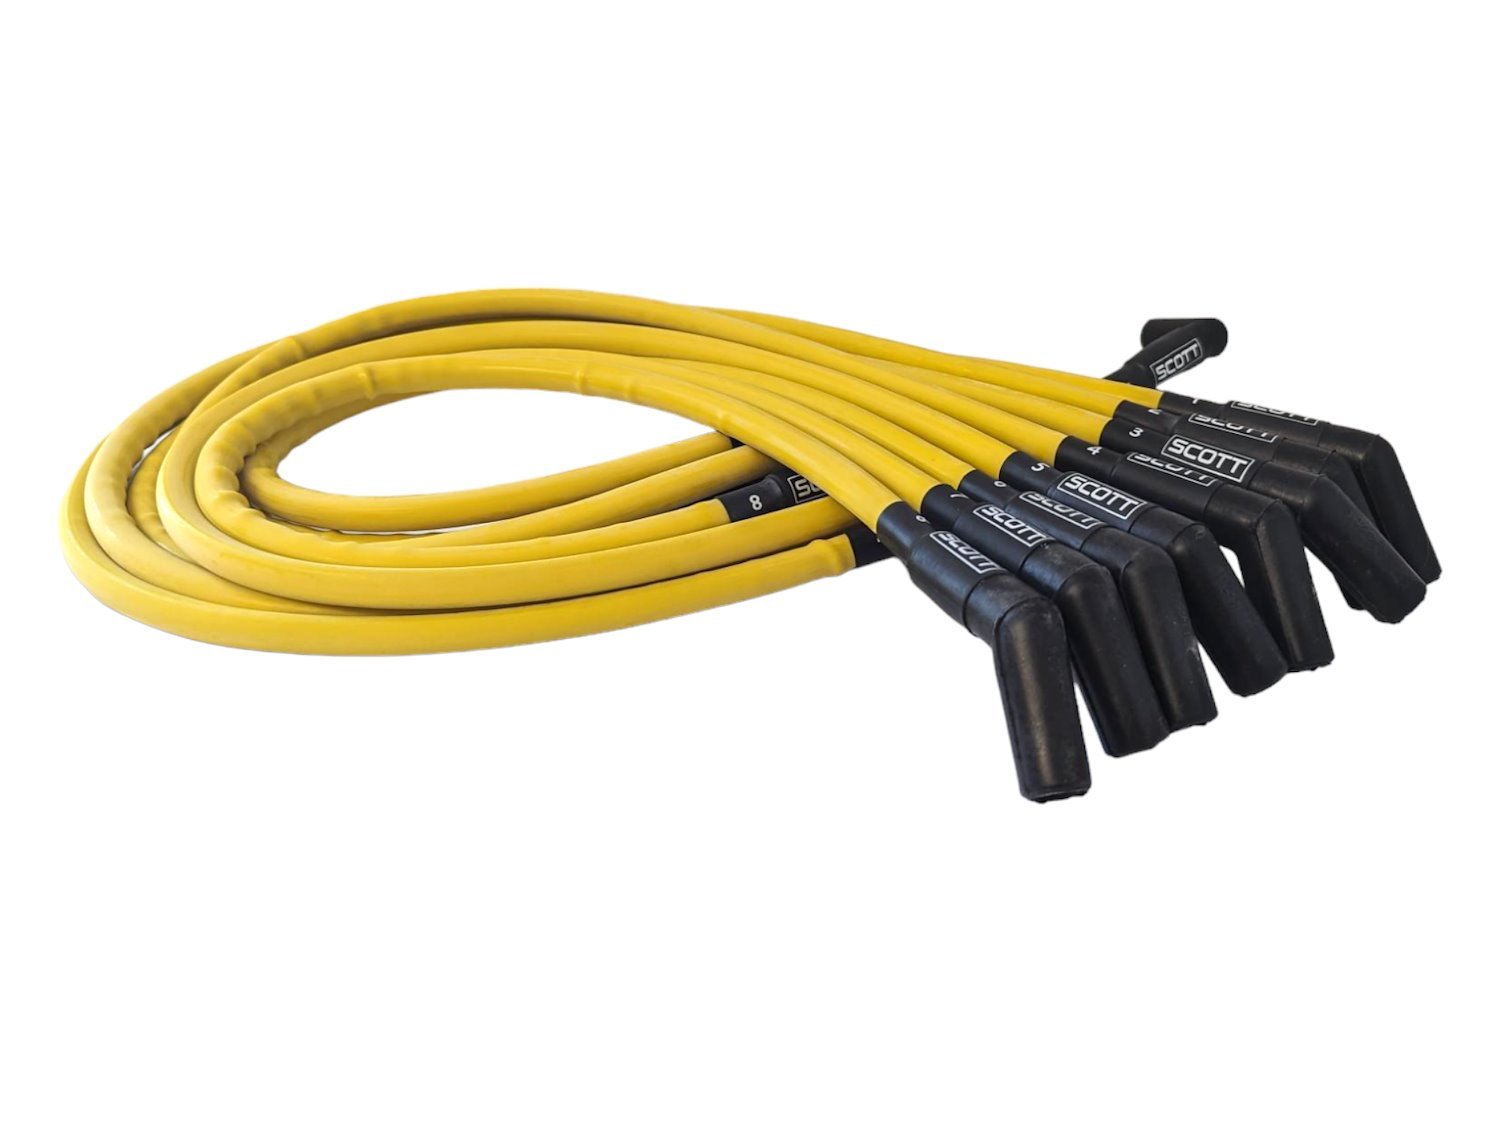 SPW300-CH-415-7 Super Mag Fiberglass-Oversleeved Spark Plug Wire Set for Big Block Chevy, Over Valve Cover [Yellow]